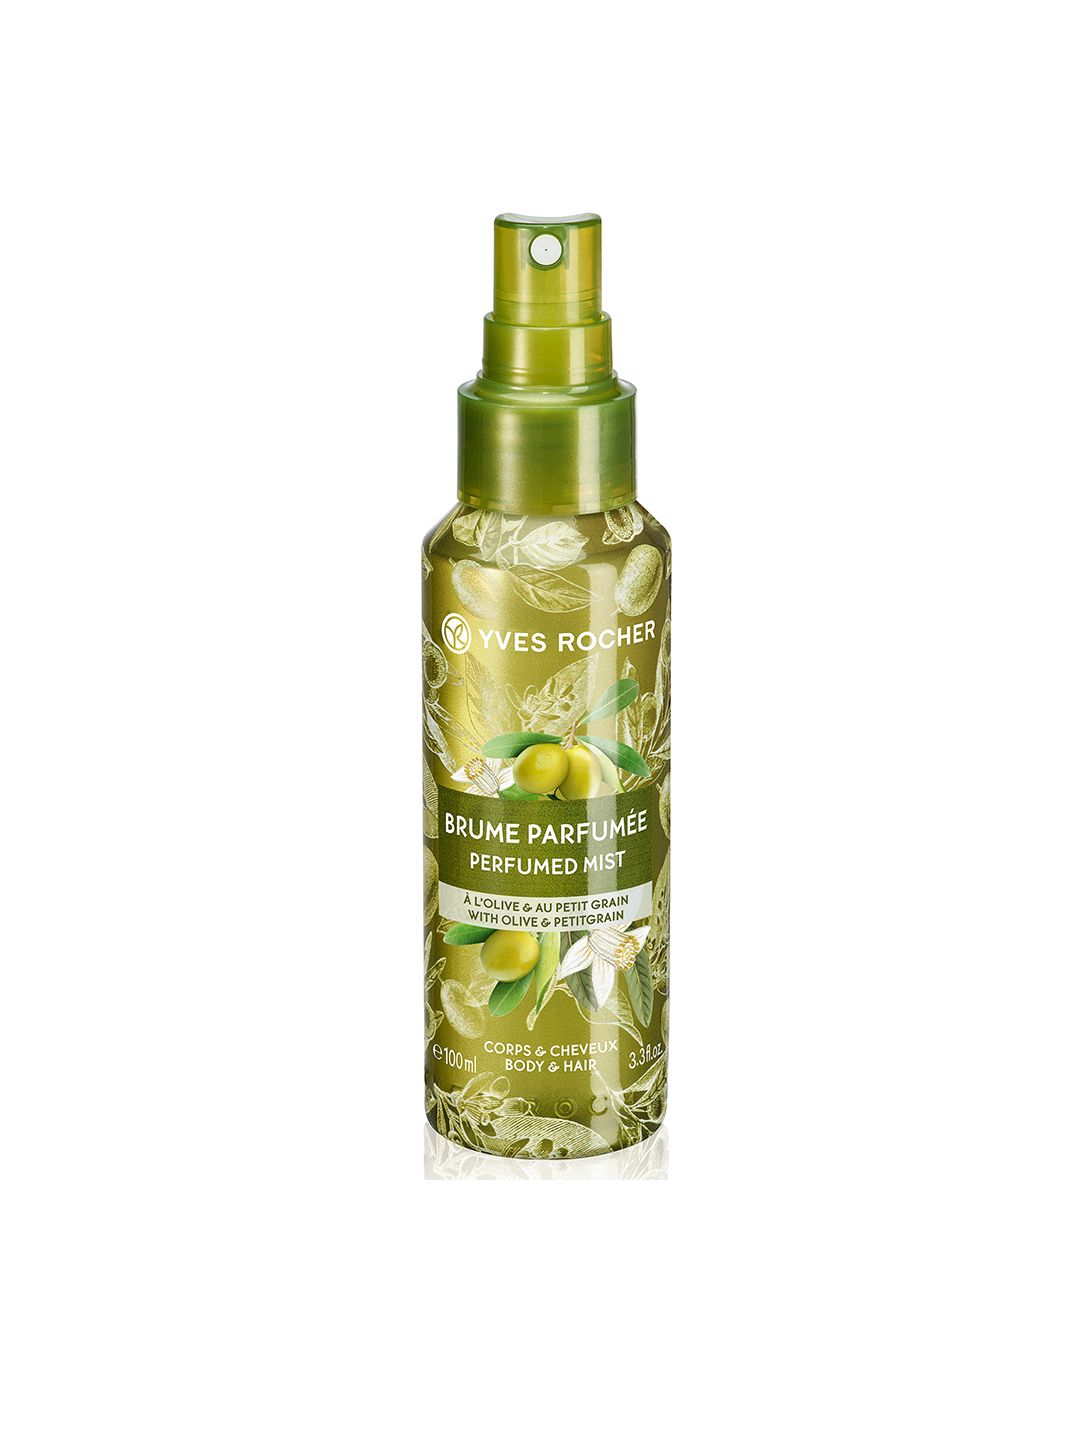 Yves Rocher Olive & Petitgrain Perfumed Sustainable Body & Hair Mist 100ml Price in India